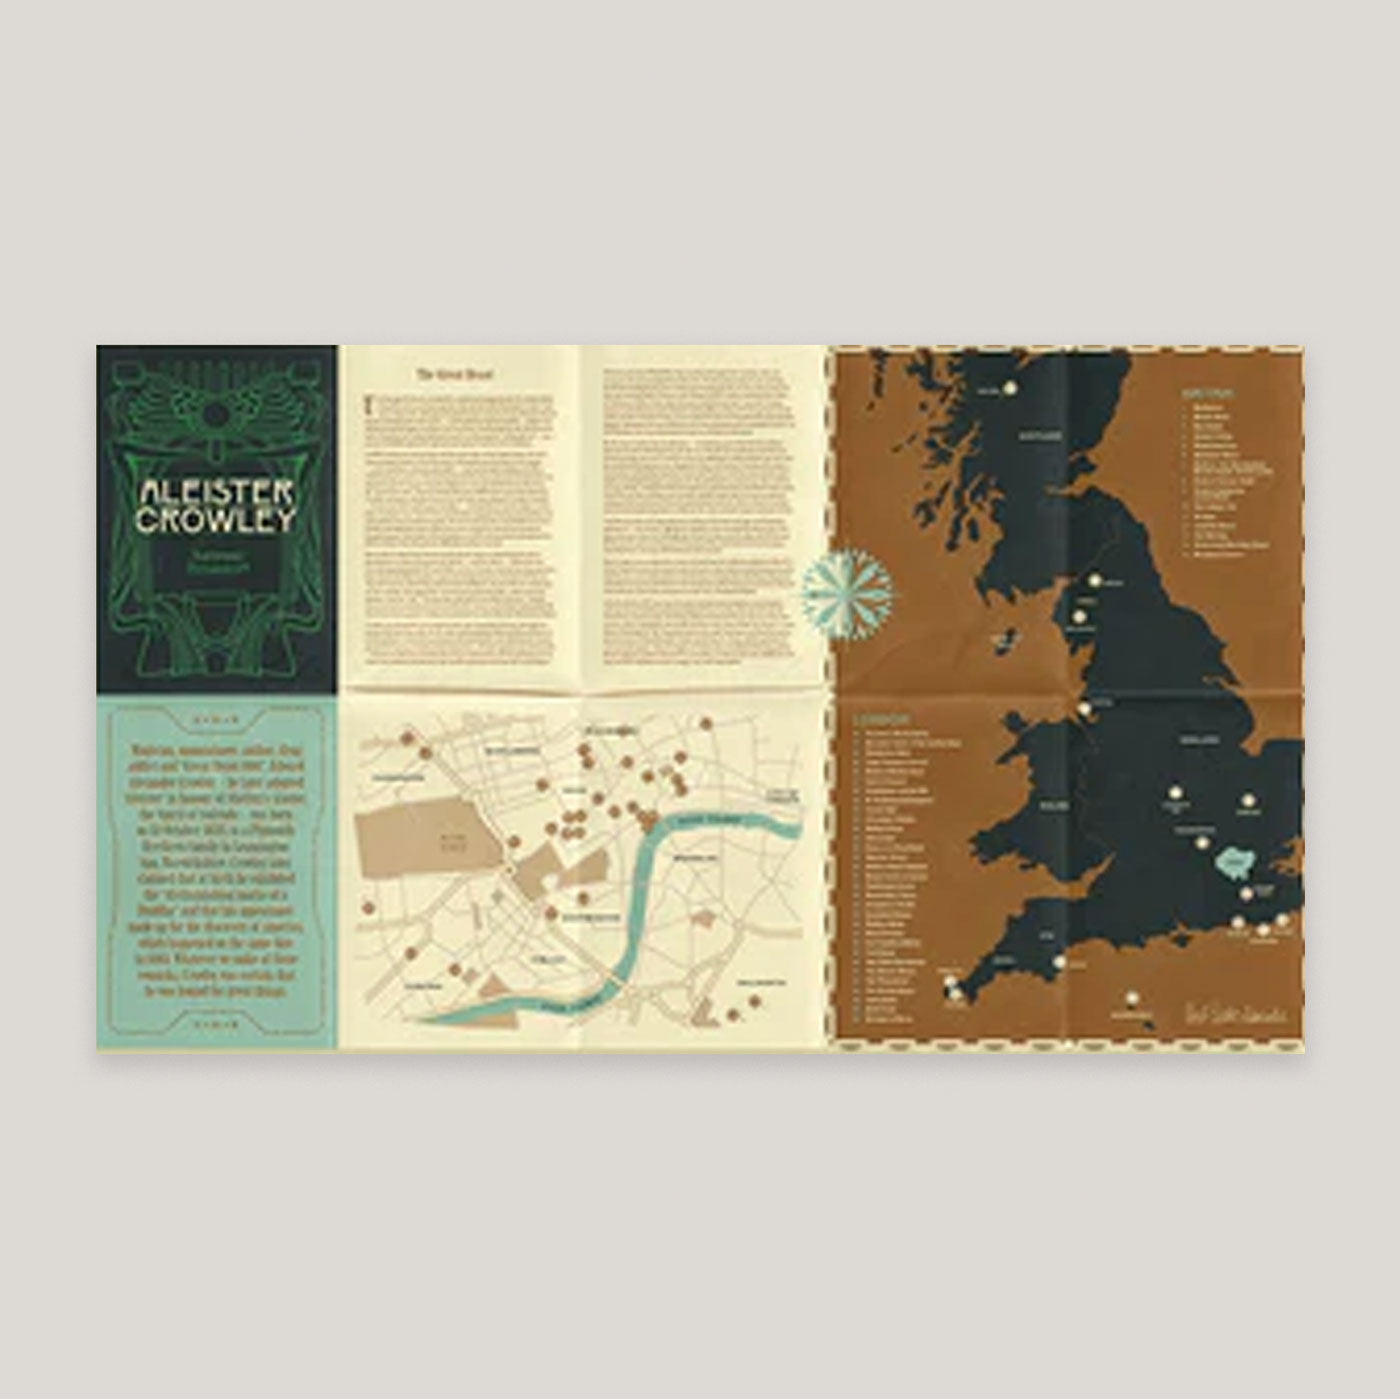 Aleister Crowley: The Beast in Britain | Herb Lester Map